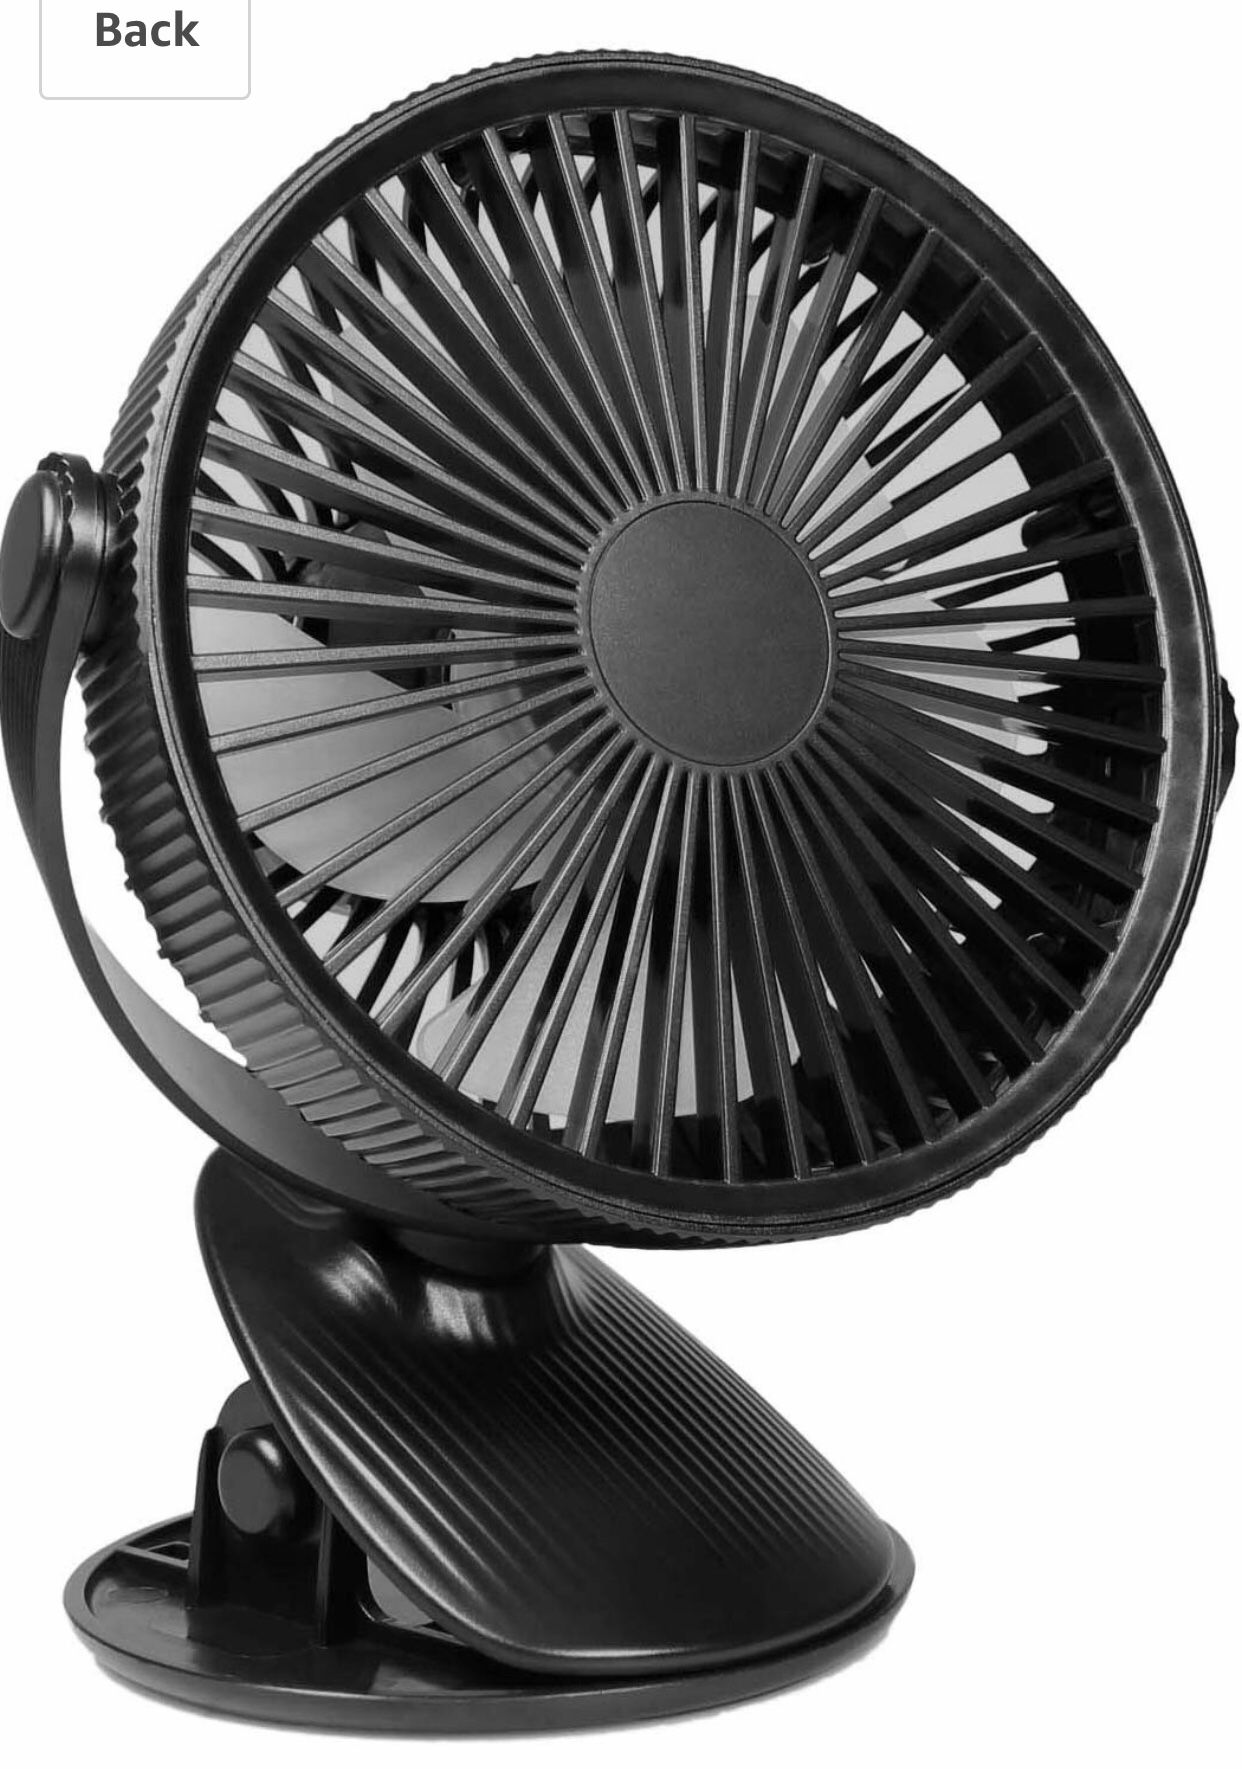 MADETEC Small Desk Clip Fan, Battery Operated Oscillating Fan Mini USB Portable Personal Cooling Fan for Stroller Home Office Bedroom Outdoor